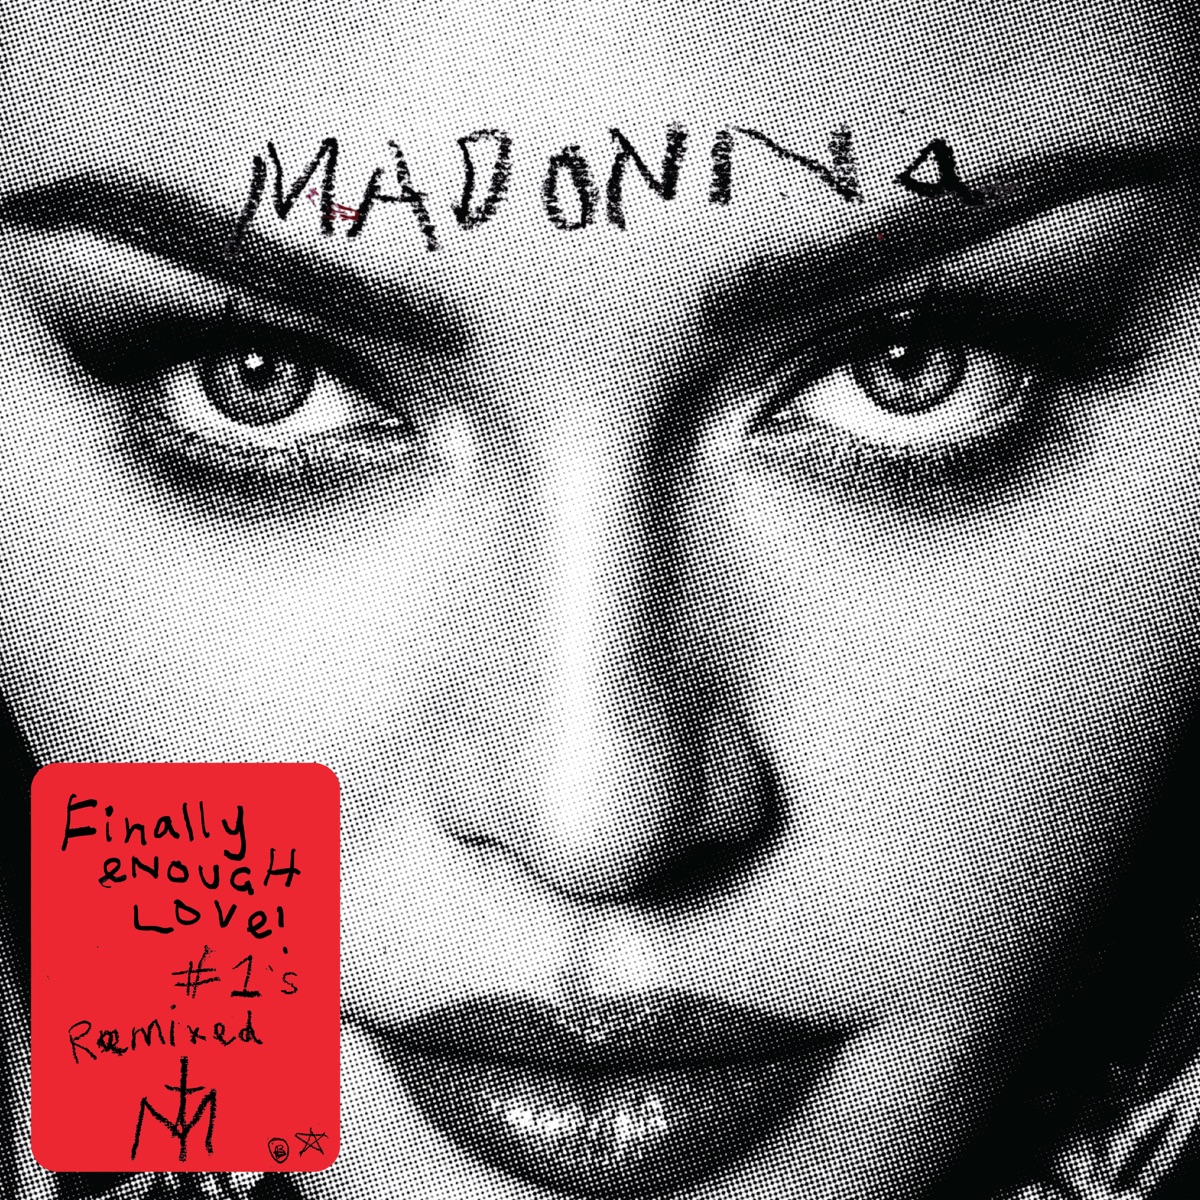 Finally Enough Love! by Madonna on Apple Music